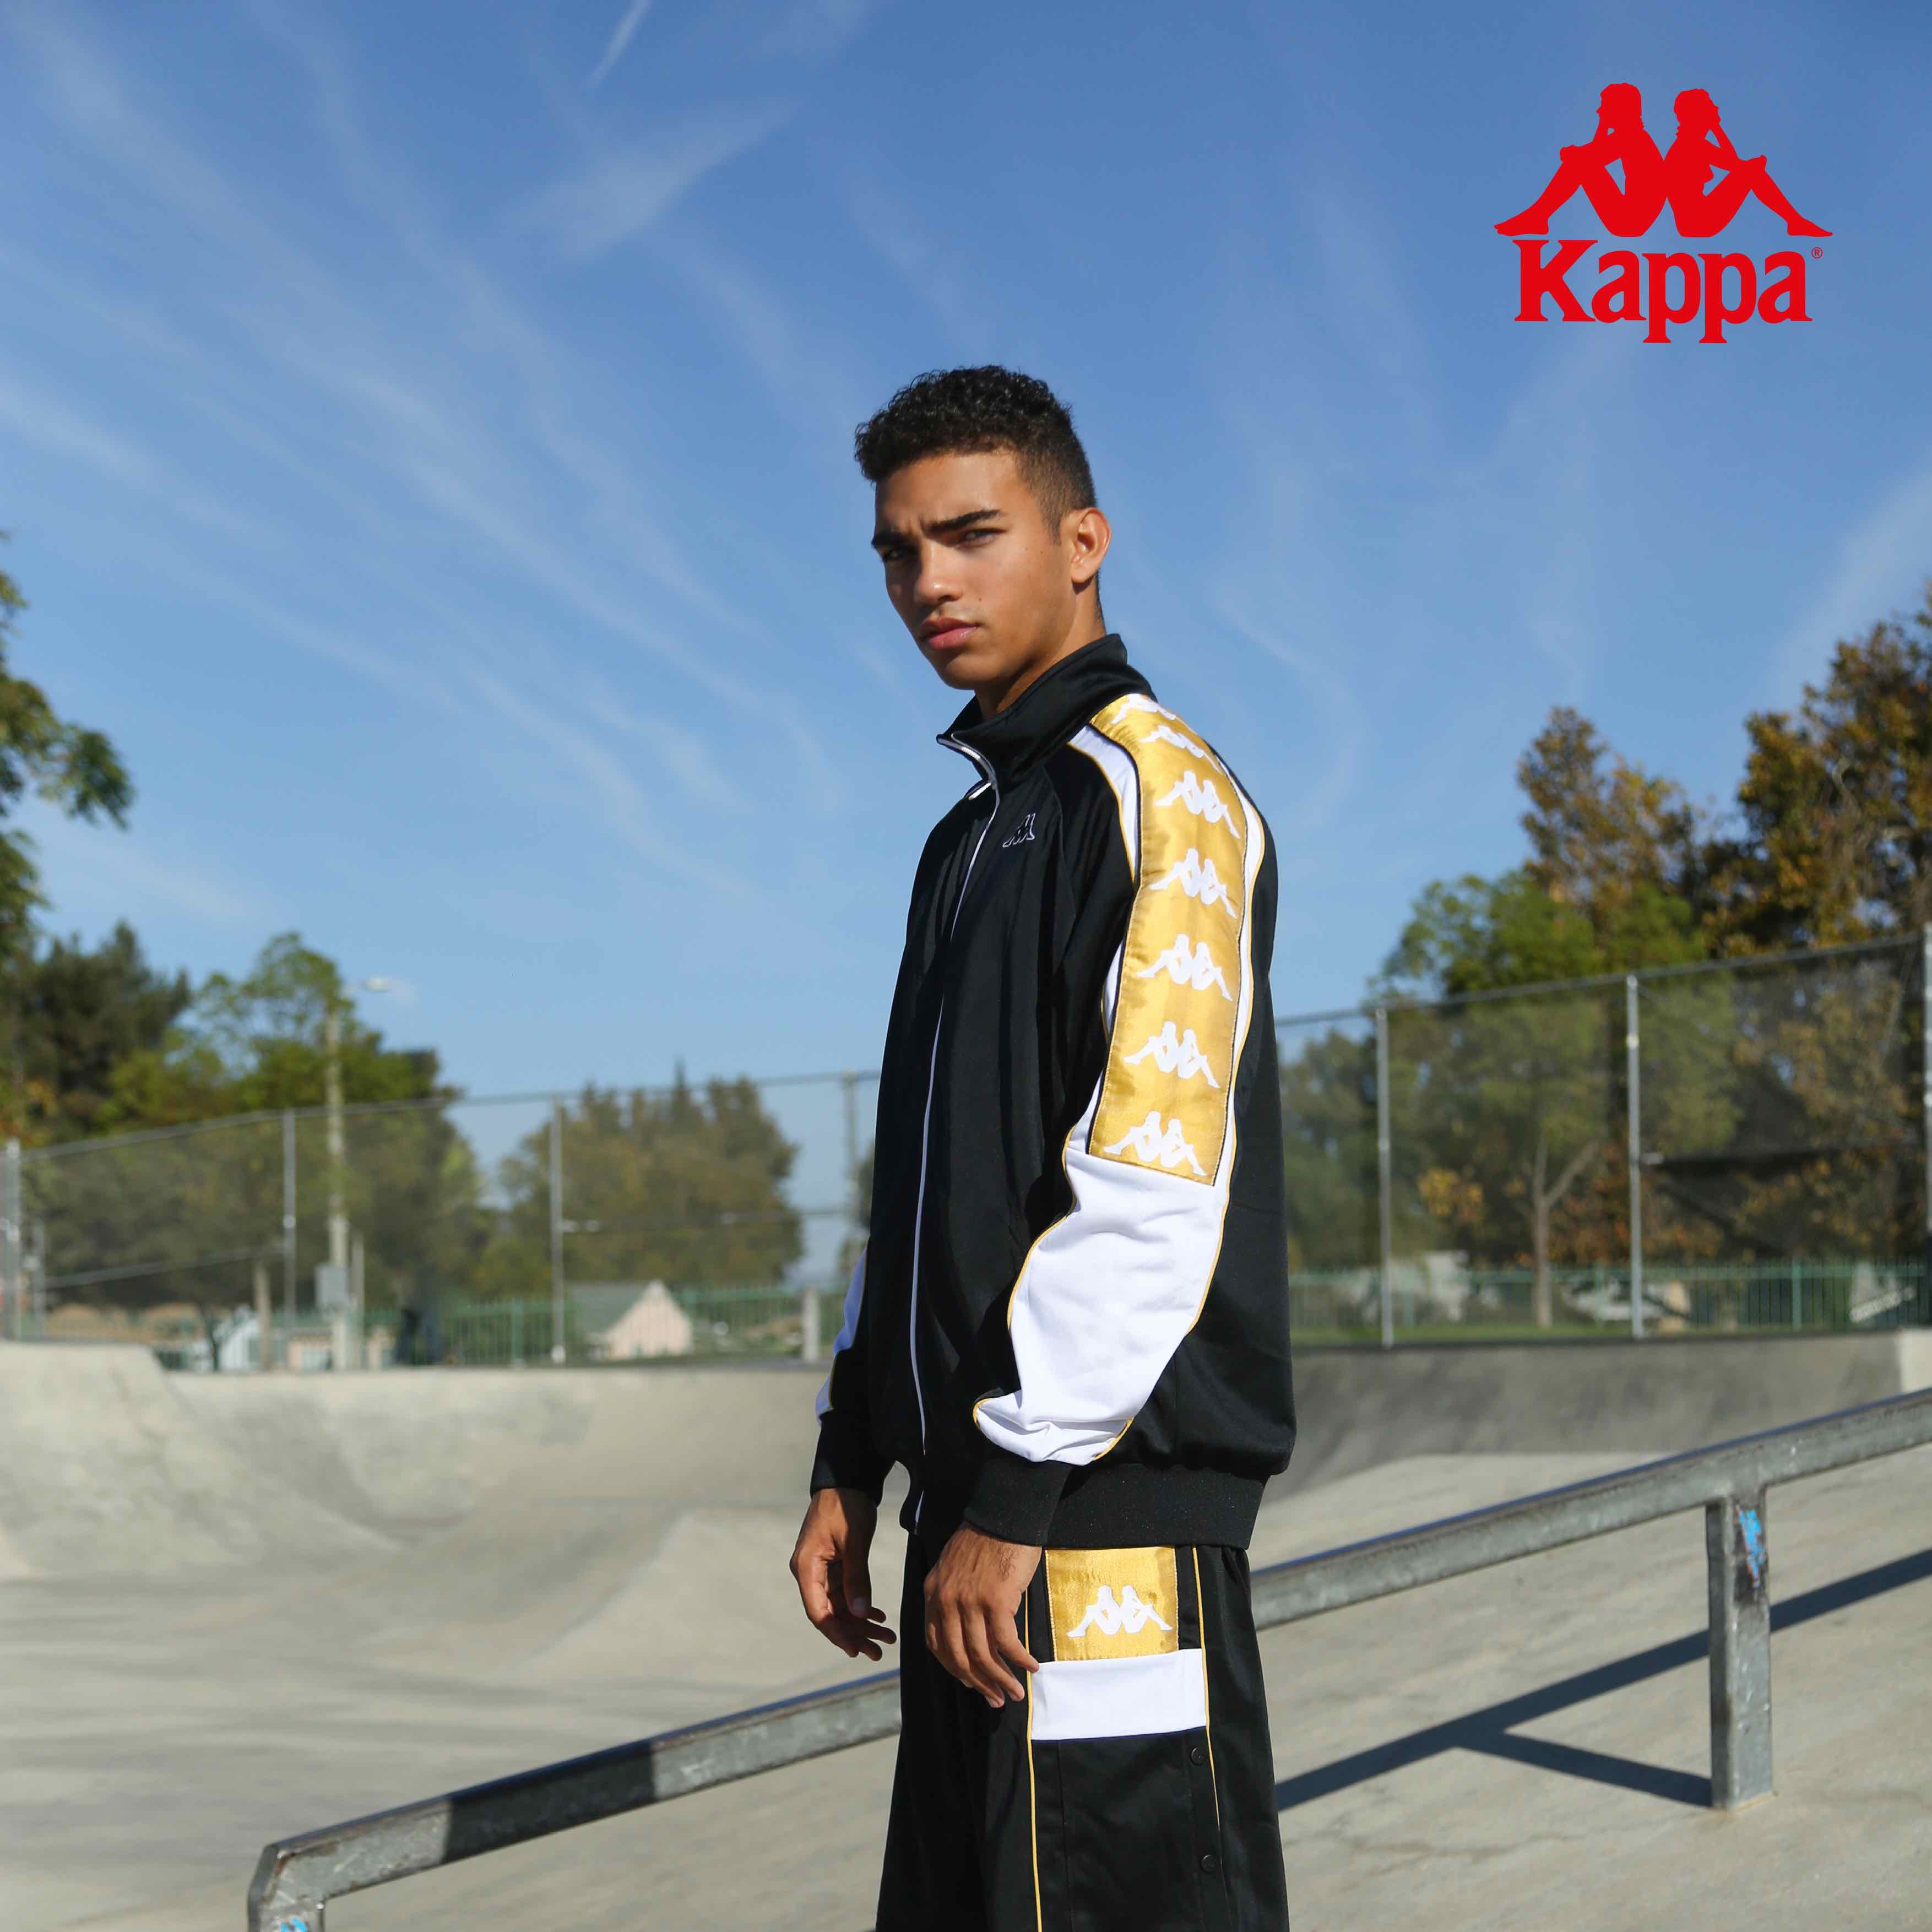 serie ejer Overleve Kappa South Africa on X: "Stay golden in the black gold Kappa Banda 10  track top https://t.co/jvercEp5wh" / X